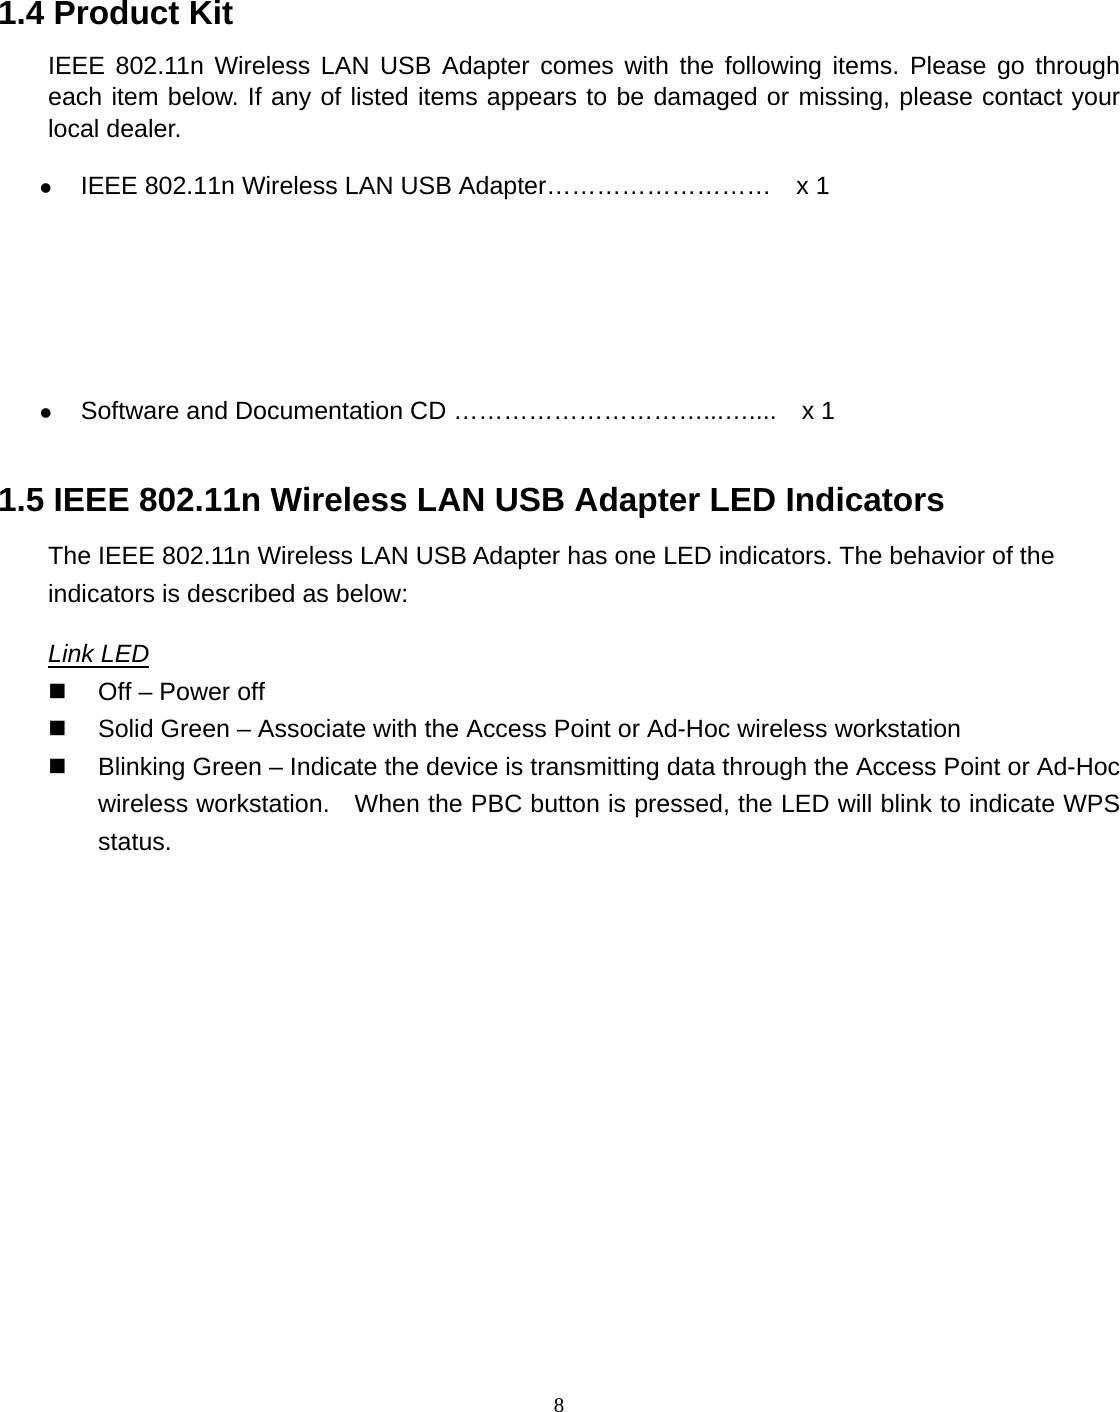  8 1.4 Product Kit IEEE 802.11n Wireless LAN USB Adapter comes with the following items. Please go through each item below. If any of listed items appears to be damaged or missing, please contact your local dealer. z IEEE 802.11n Wireless LAN USB Adapter………………………    x 1  z Software and Documentation CD …………………………...…....    x 1 1.5 IEEE 802.11n Wireless LAN USB Adapter LED Indicators The IEEE 802.11n Wireless LAN USB Adapter has one LED indicators. The behavior of the indicators is described as below: Link LED   Off – Power off     Solid Green – Associate with the Access Point or Ad-Hoc wireless workstation     Blinking Green – Indicate the device is transmitting data through the Access Point or Ad-Hoc wireless workstation.    When the PBC button is pressed, the LED will blink to indicate WPS status.     